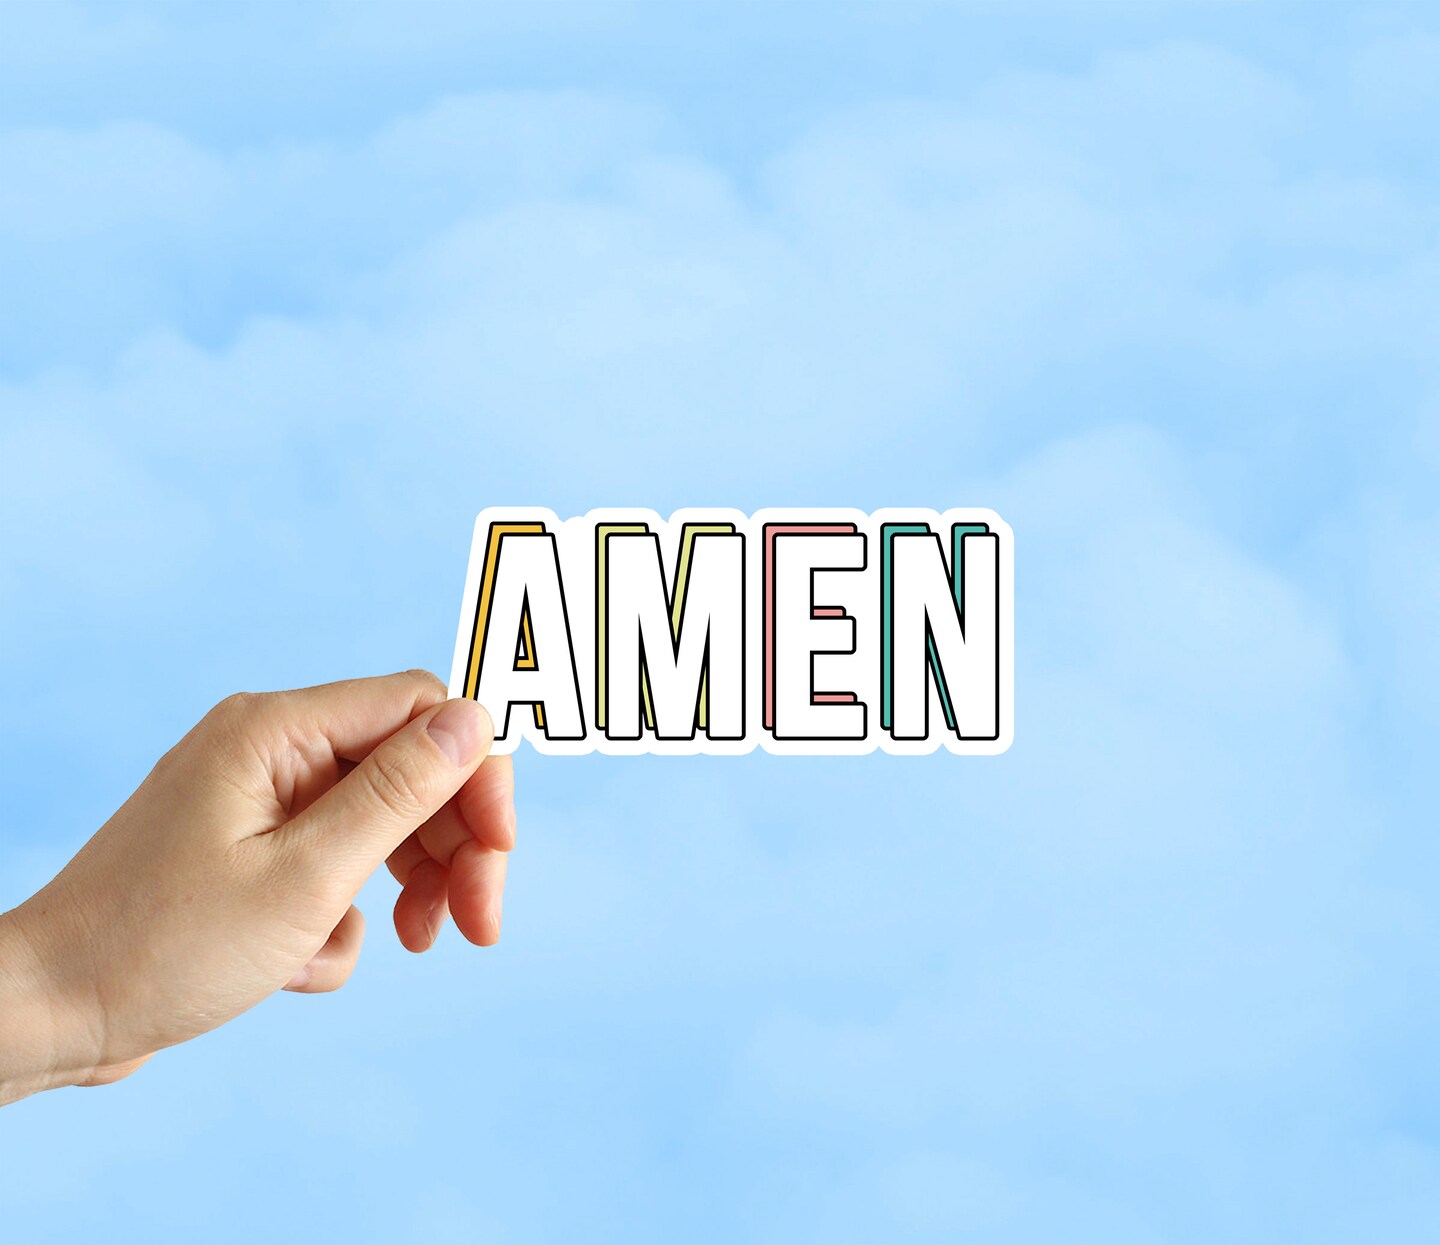 Faith – Stickers – Ameenah's Store